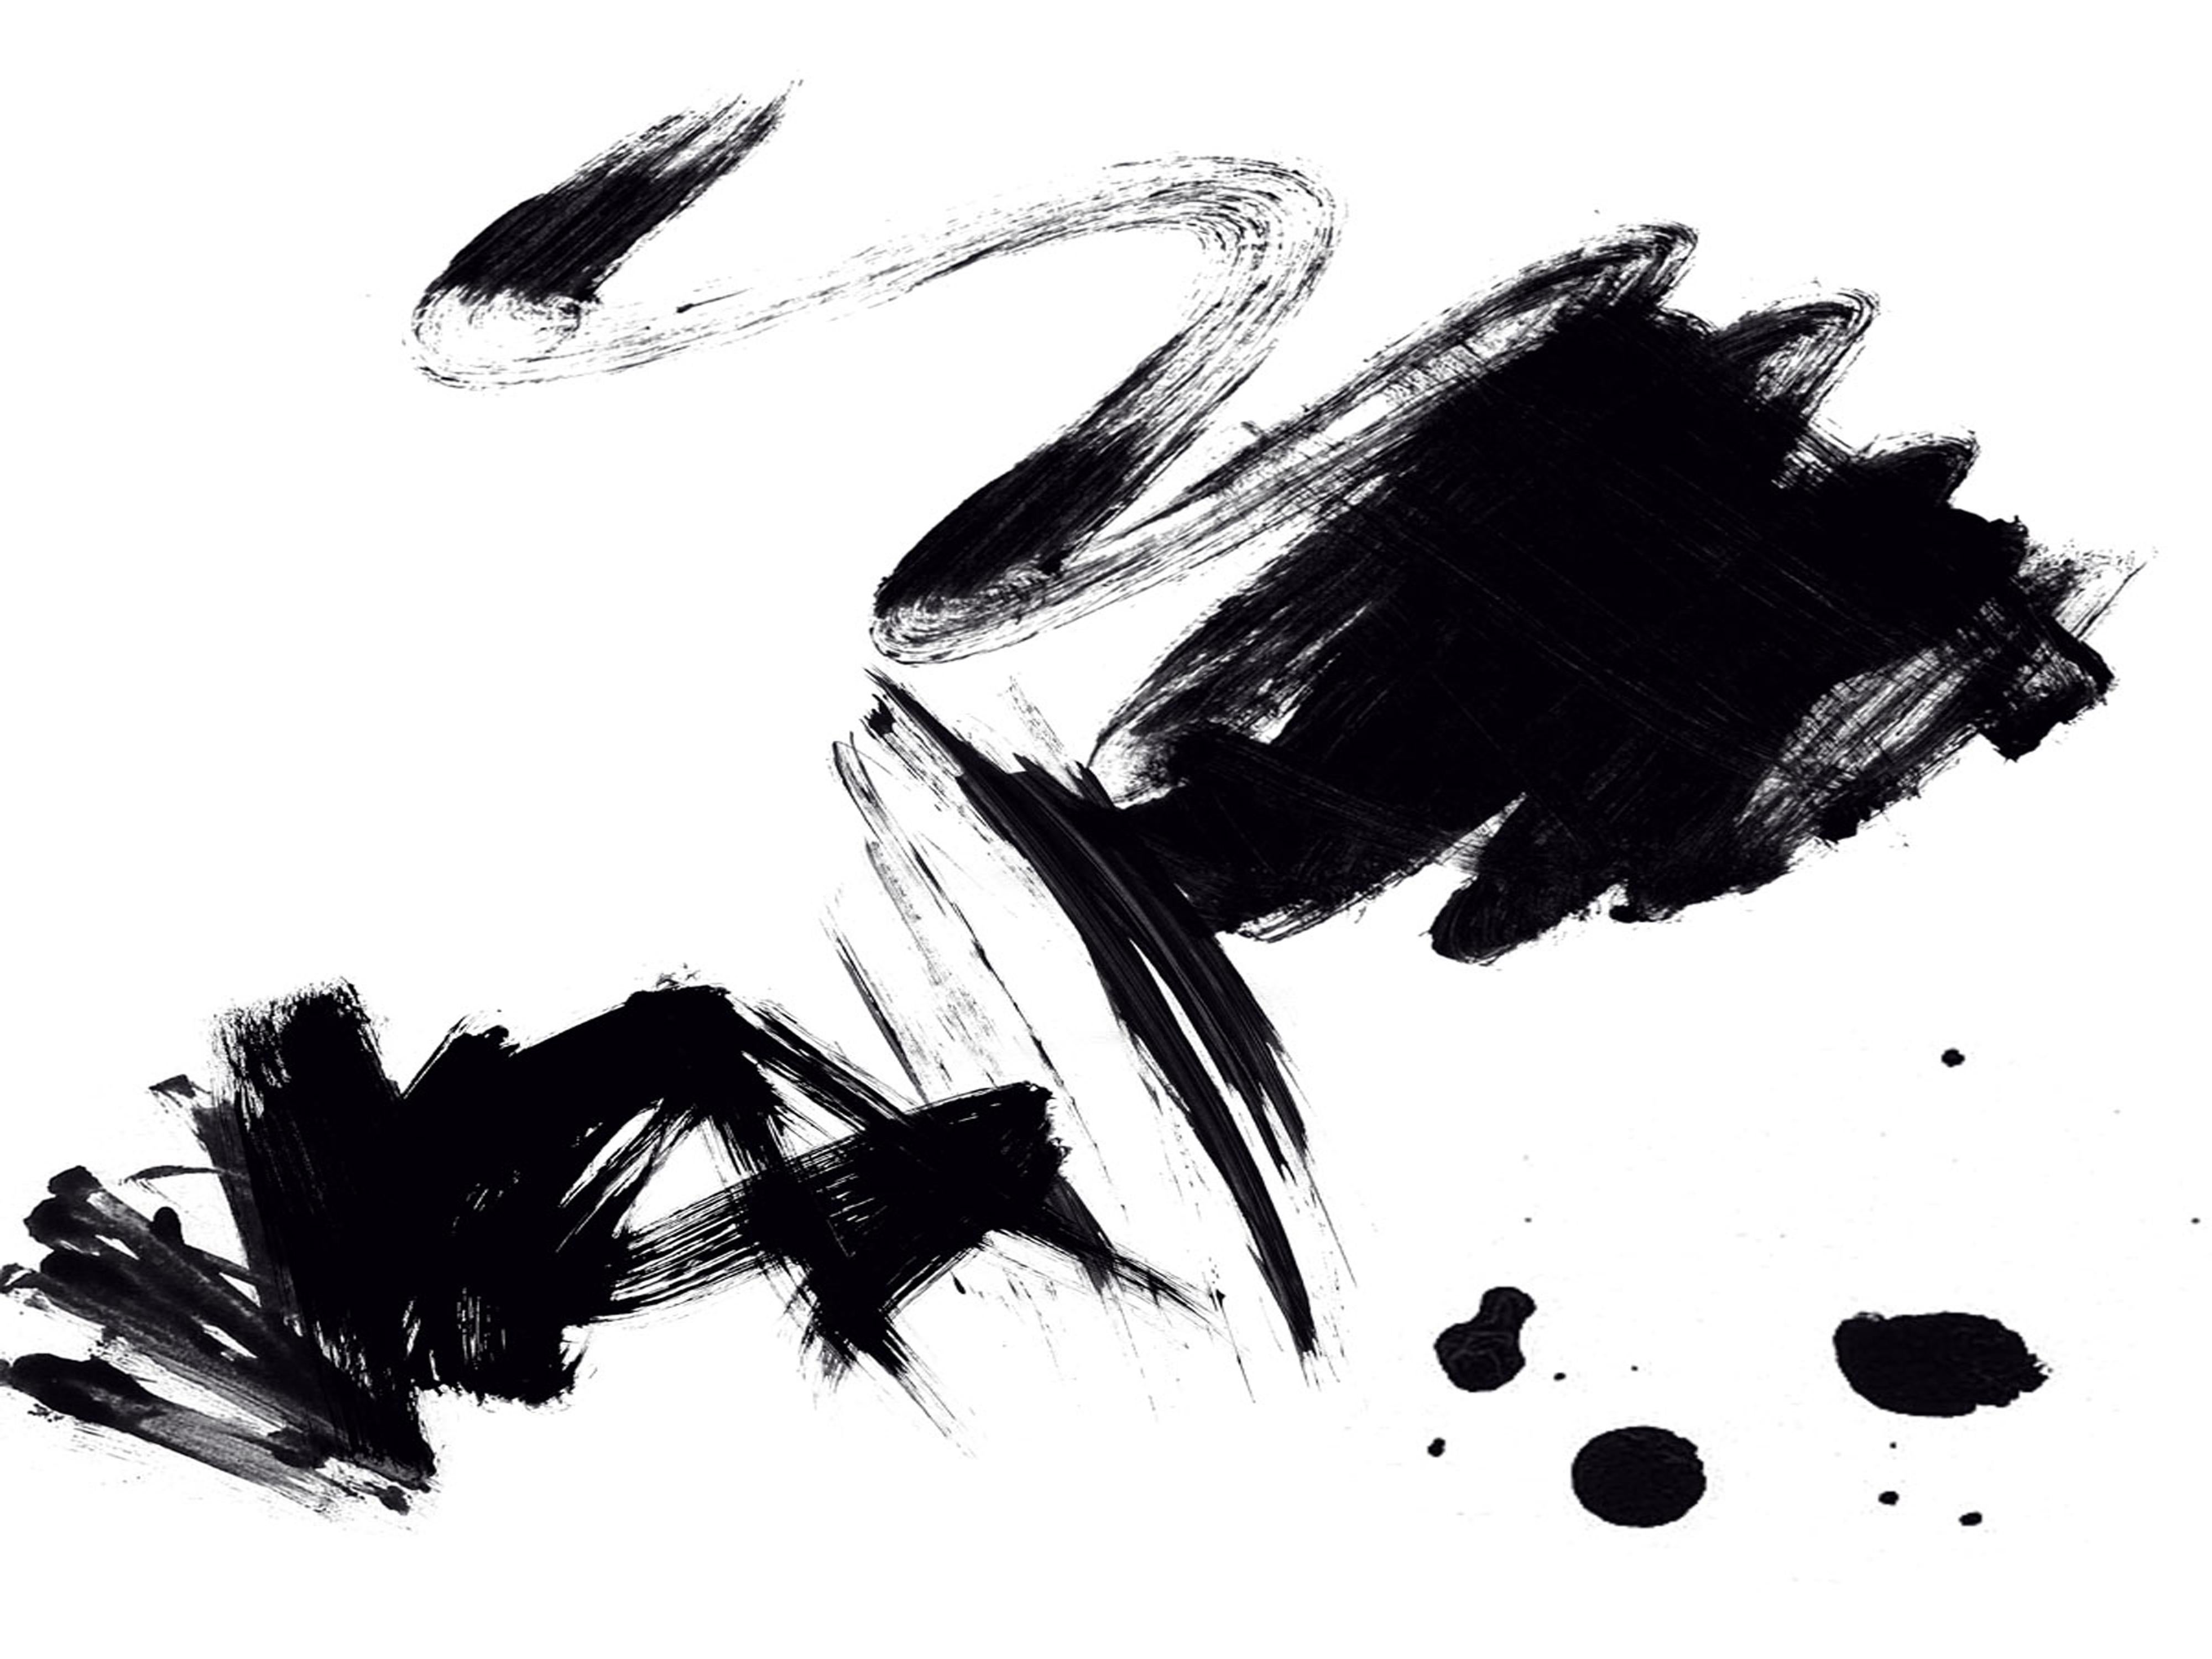 Black White Minimalist Painting Art on Canvas Textured Giclee 45 x 72 inches